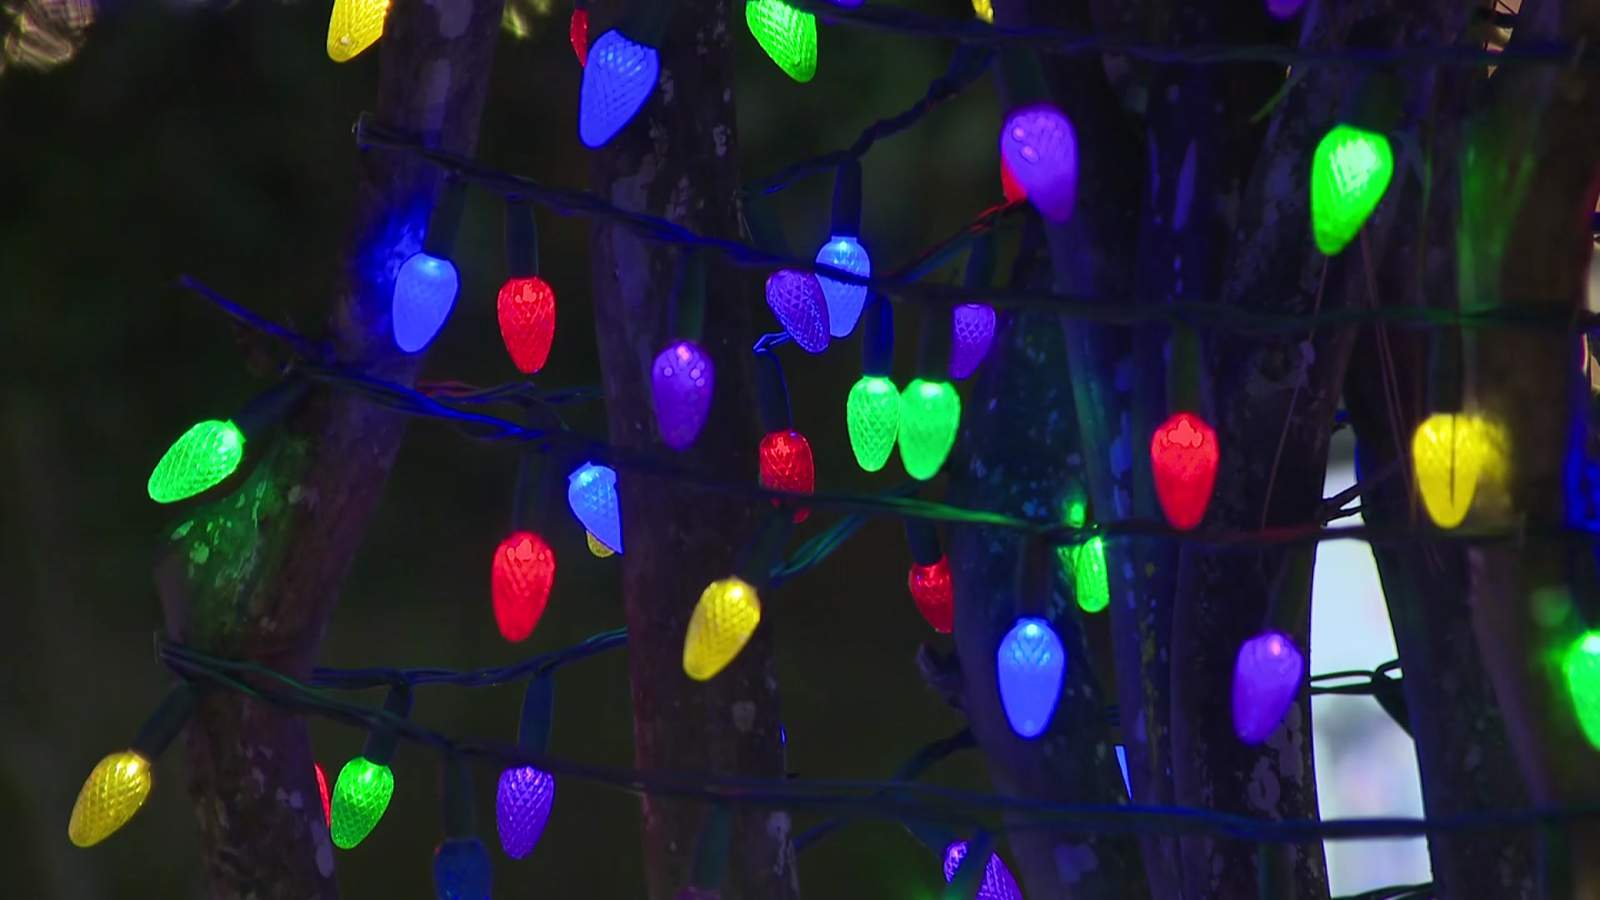 Florida boy, 7, struck, killed while looking at Christmas lights with family